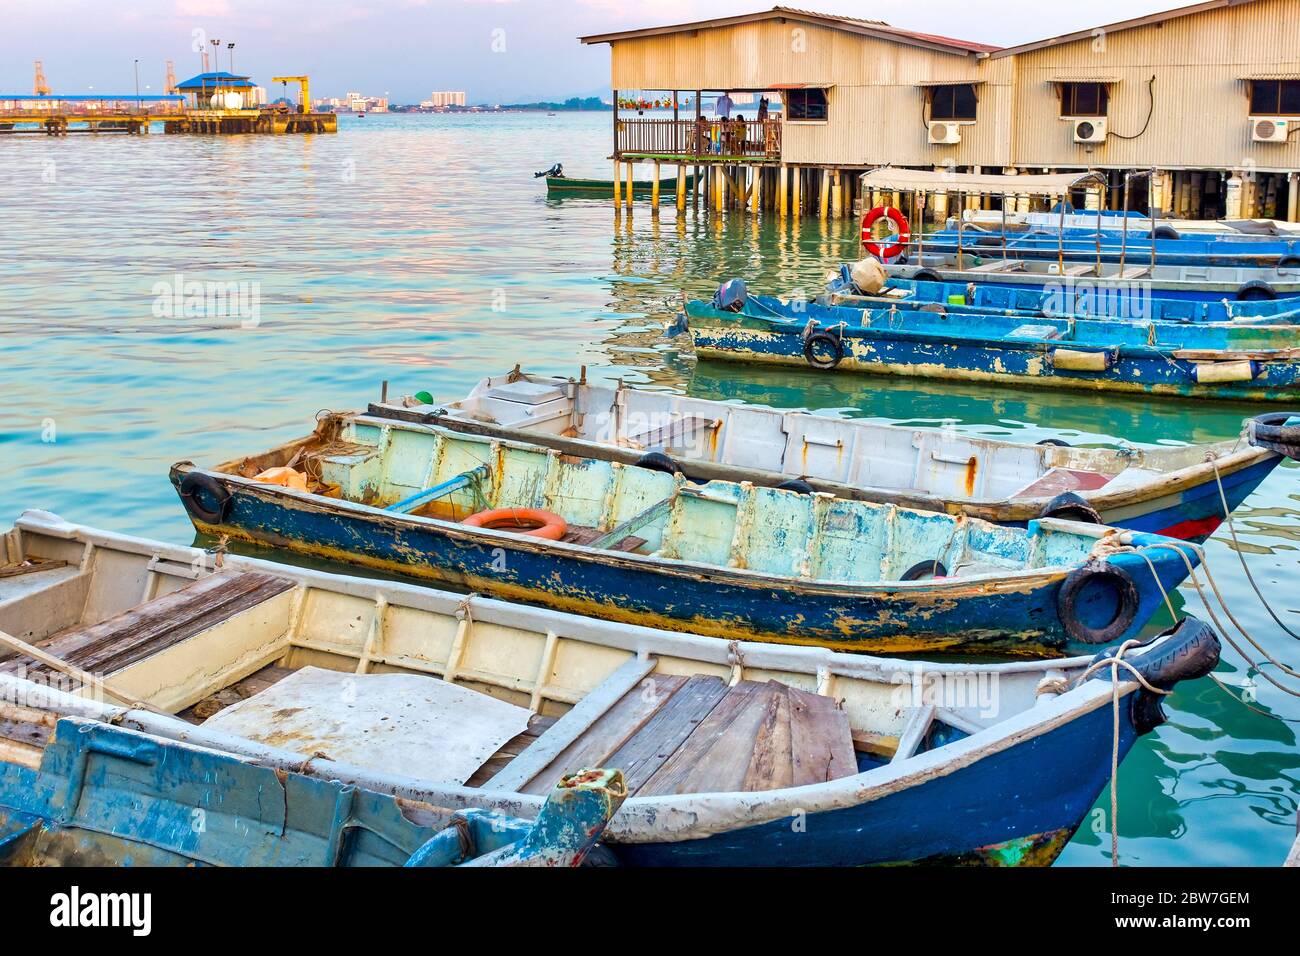 Boats in the Tan Jetty, George Town, Penang, Malaysia Stock Photo